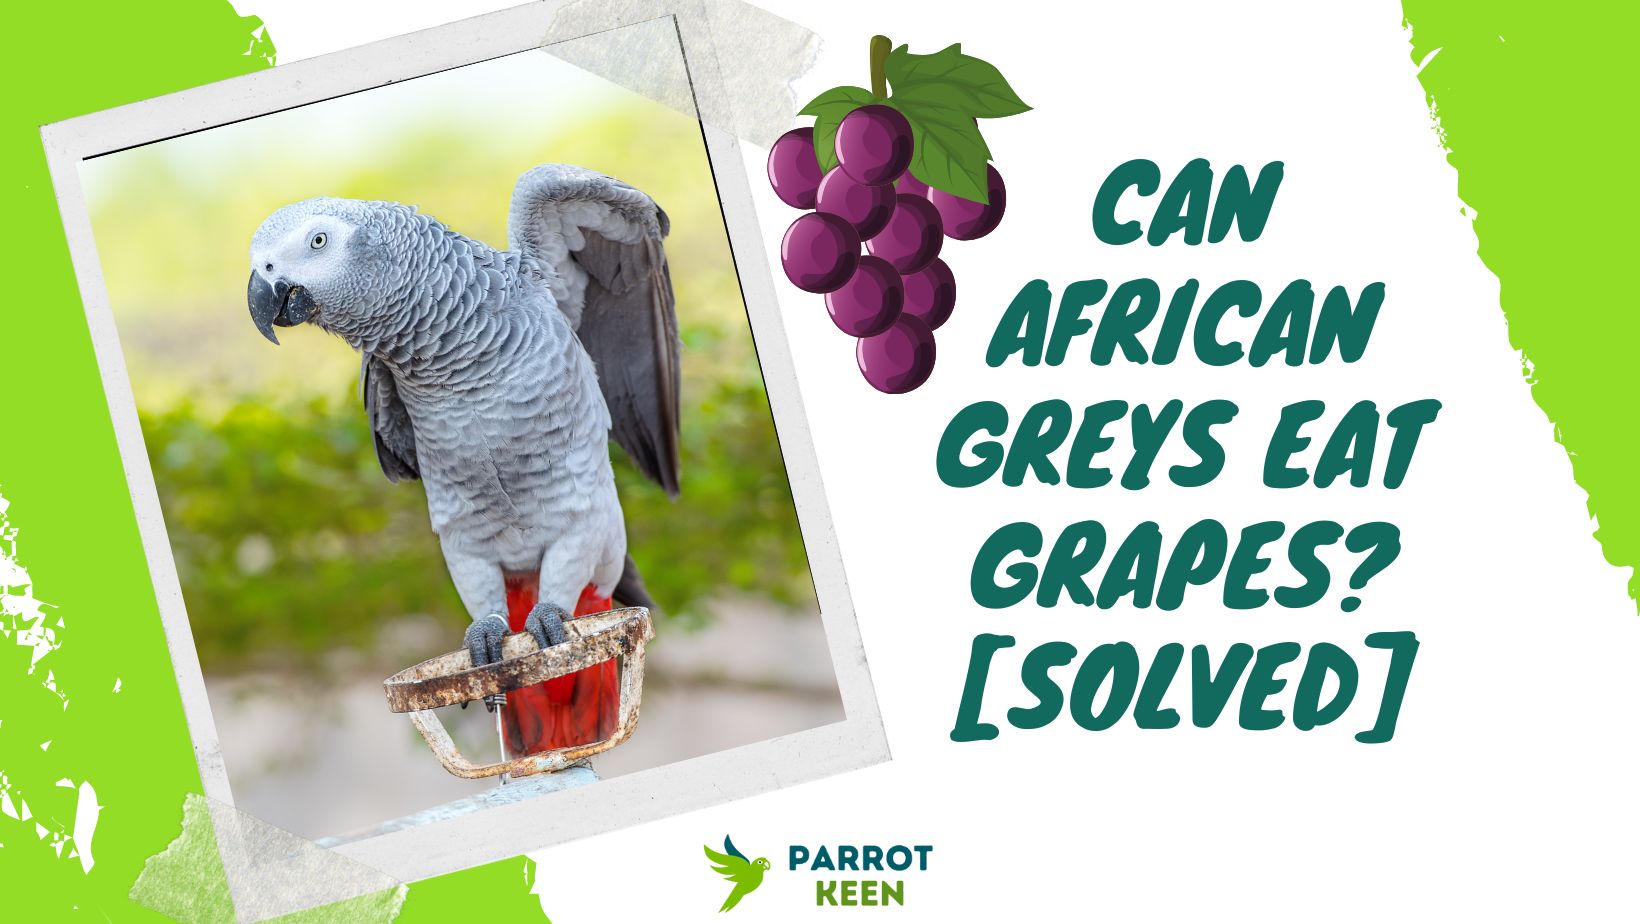 Can African Greys Eat Grapes?